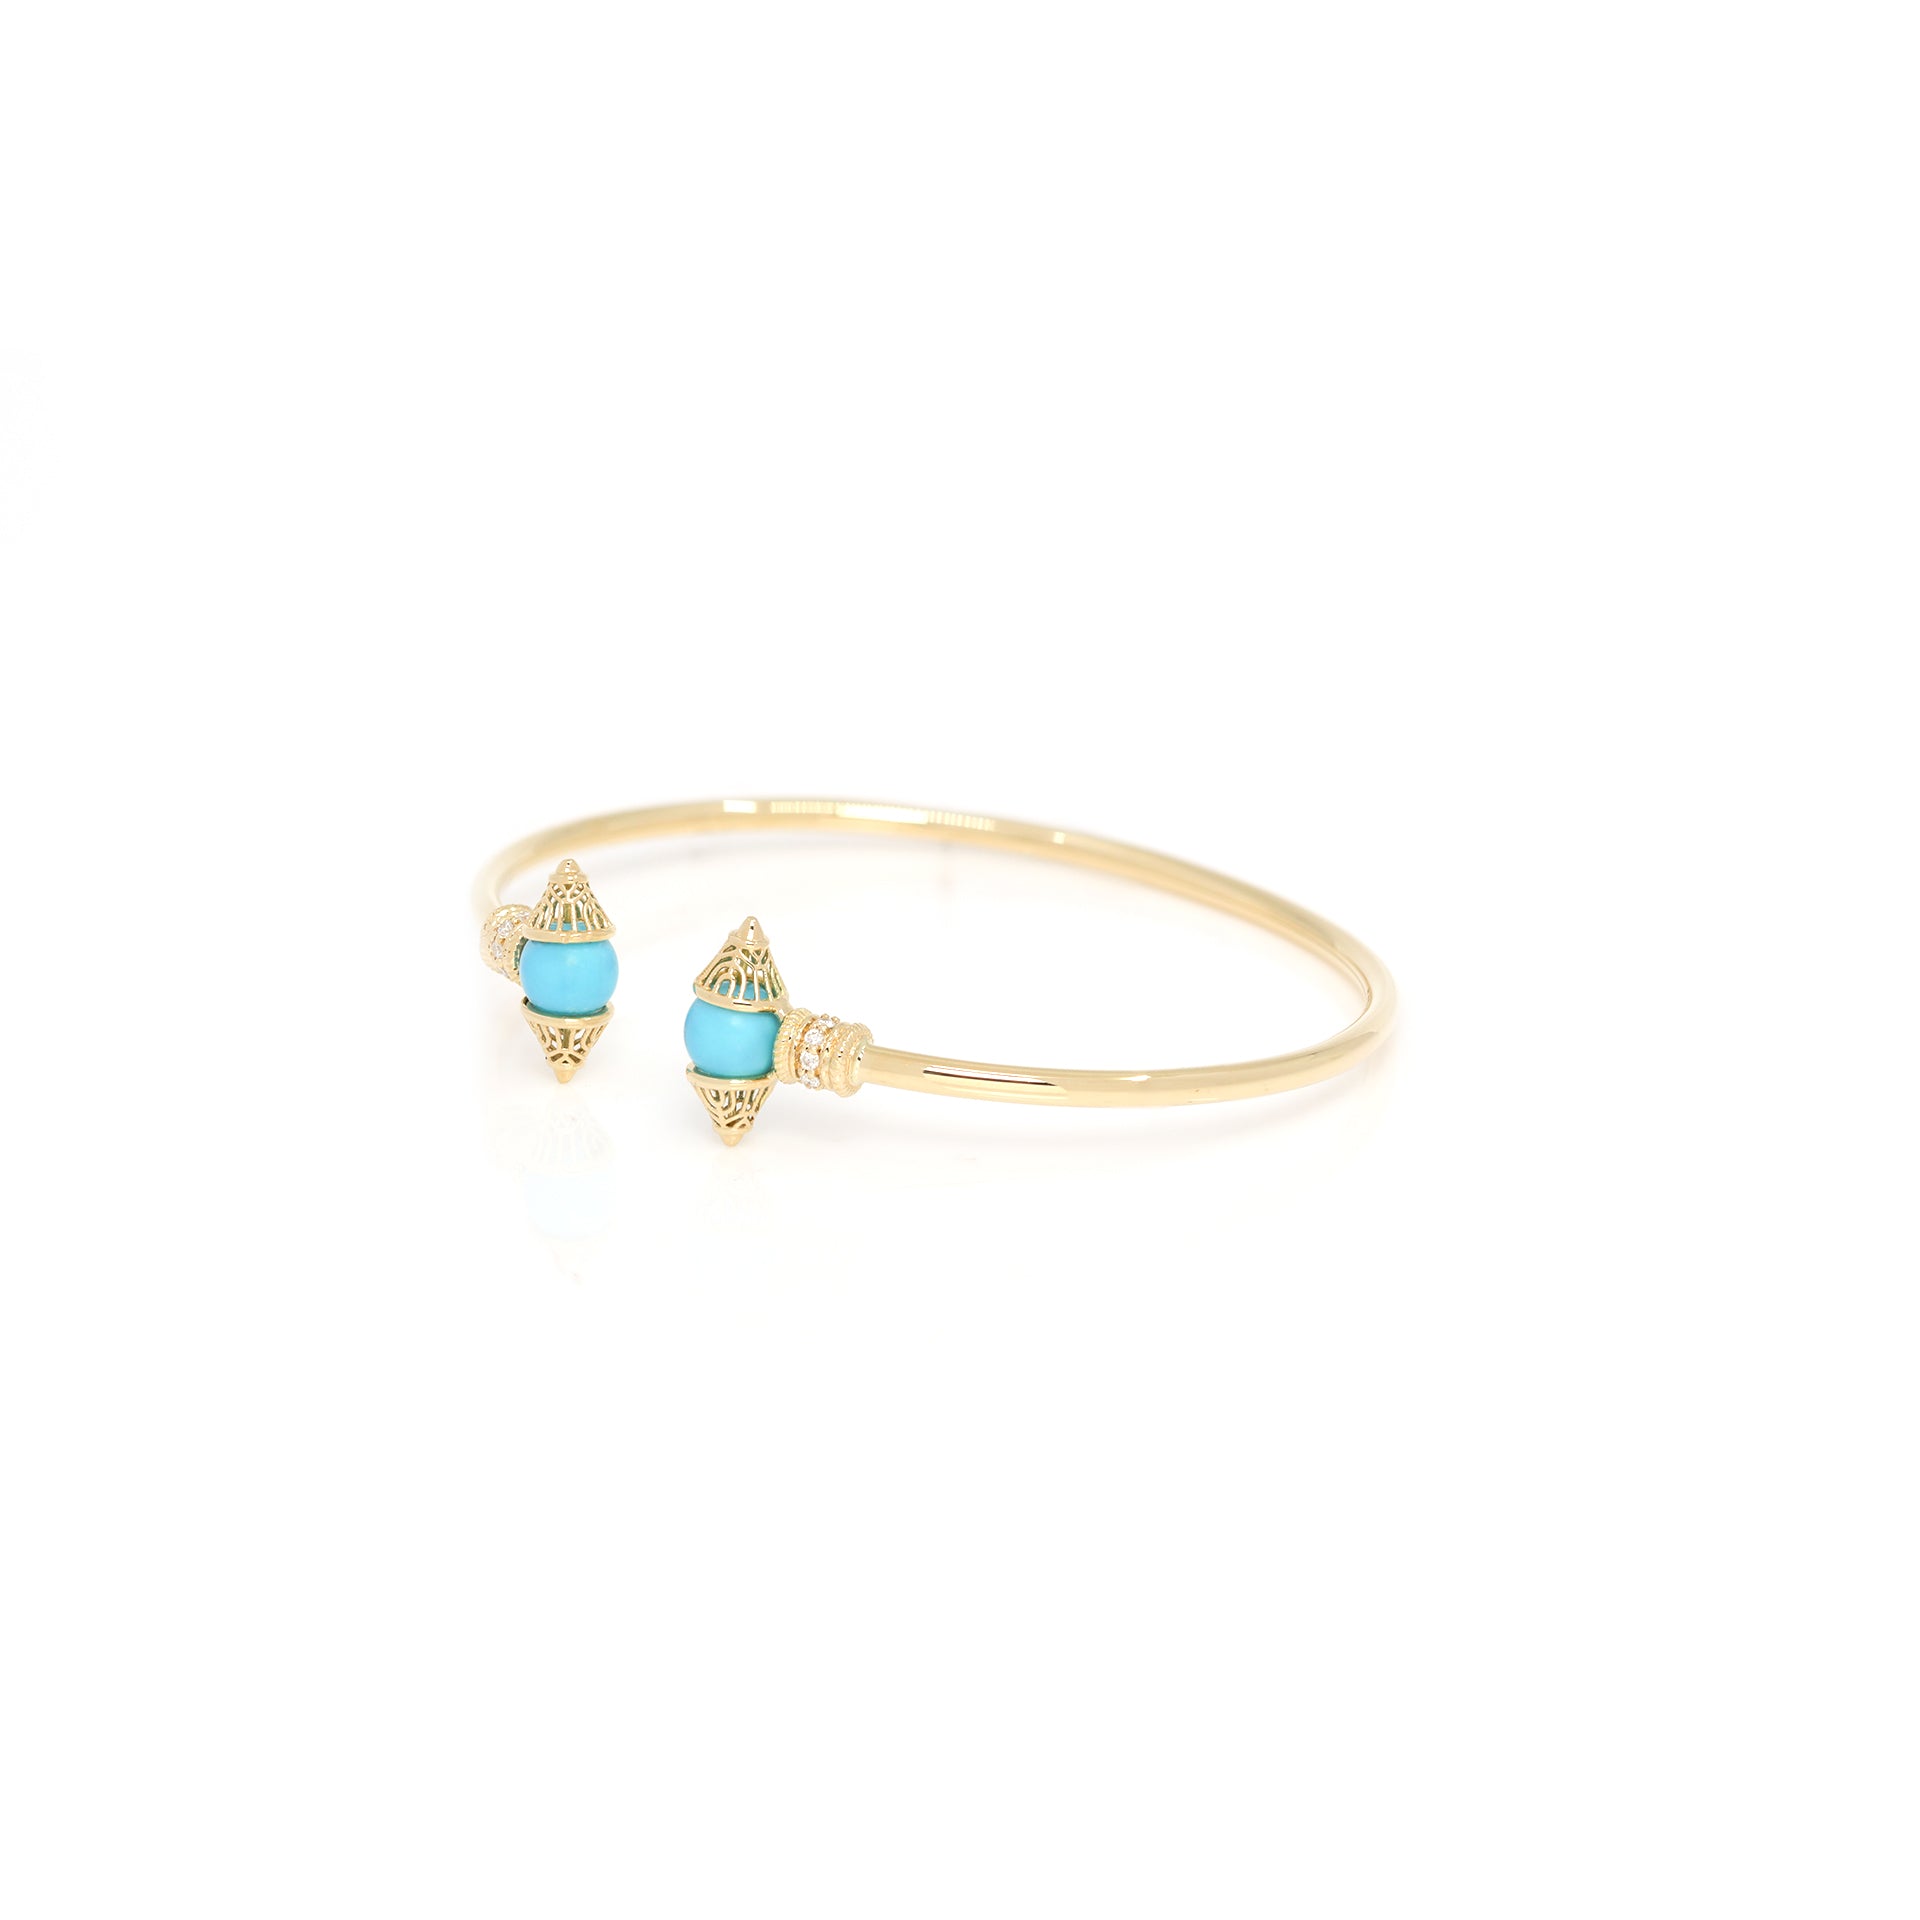 Al Merriyah moods colour Bangle in 18k gold with Turquoise and Diamonds